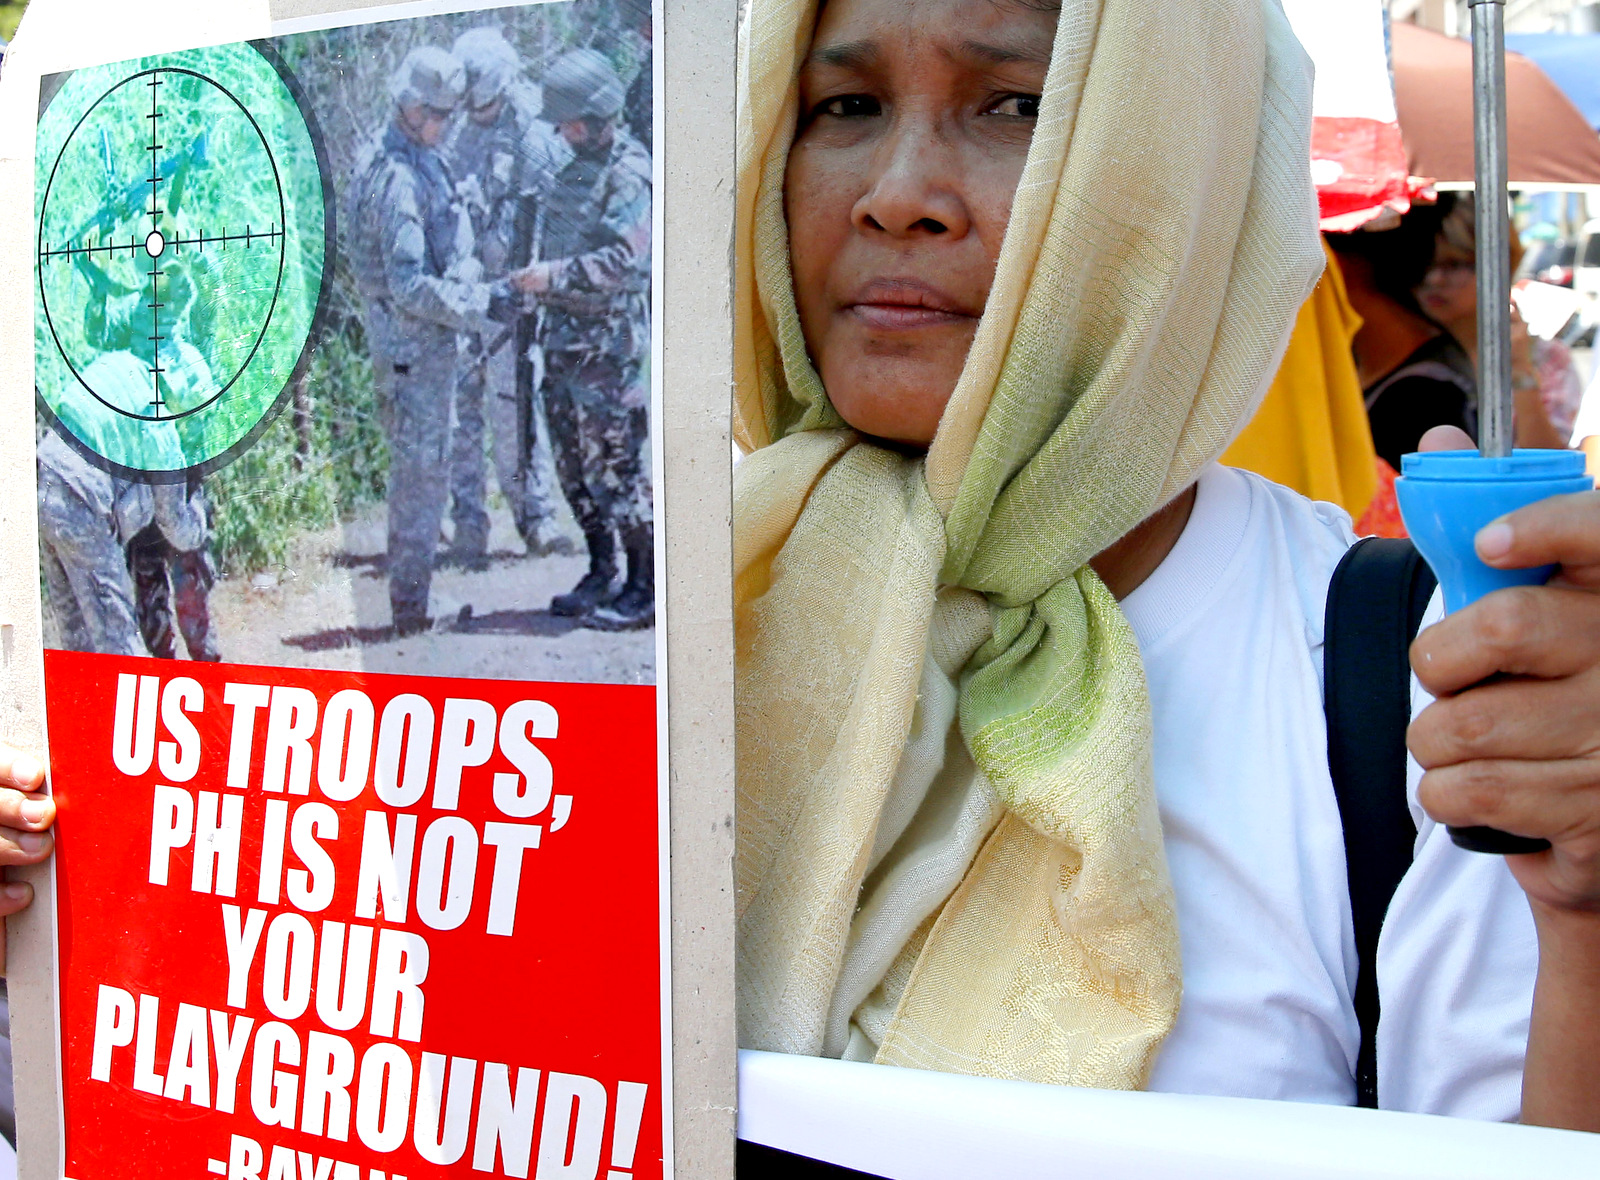 A protester holds a placard during a rally in Manila, Philippines, near the U.S. Embassy to denounce the U.S. military's role in the battle between government forces and Islamist militants. The protesters also denounced President Rodrigo Duterte's declaration of martial law in the whole region of Mindanao in southern Philippines. (AP Photo/Bullit Marquez)